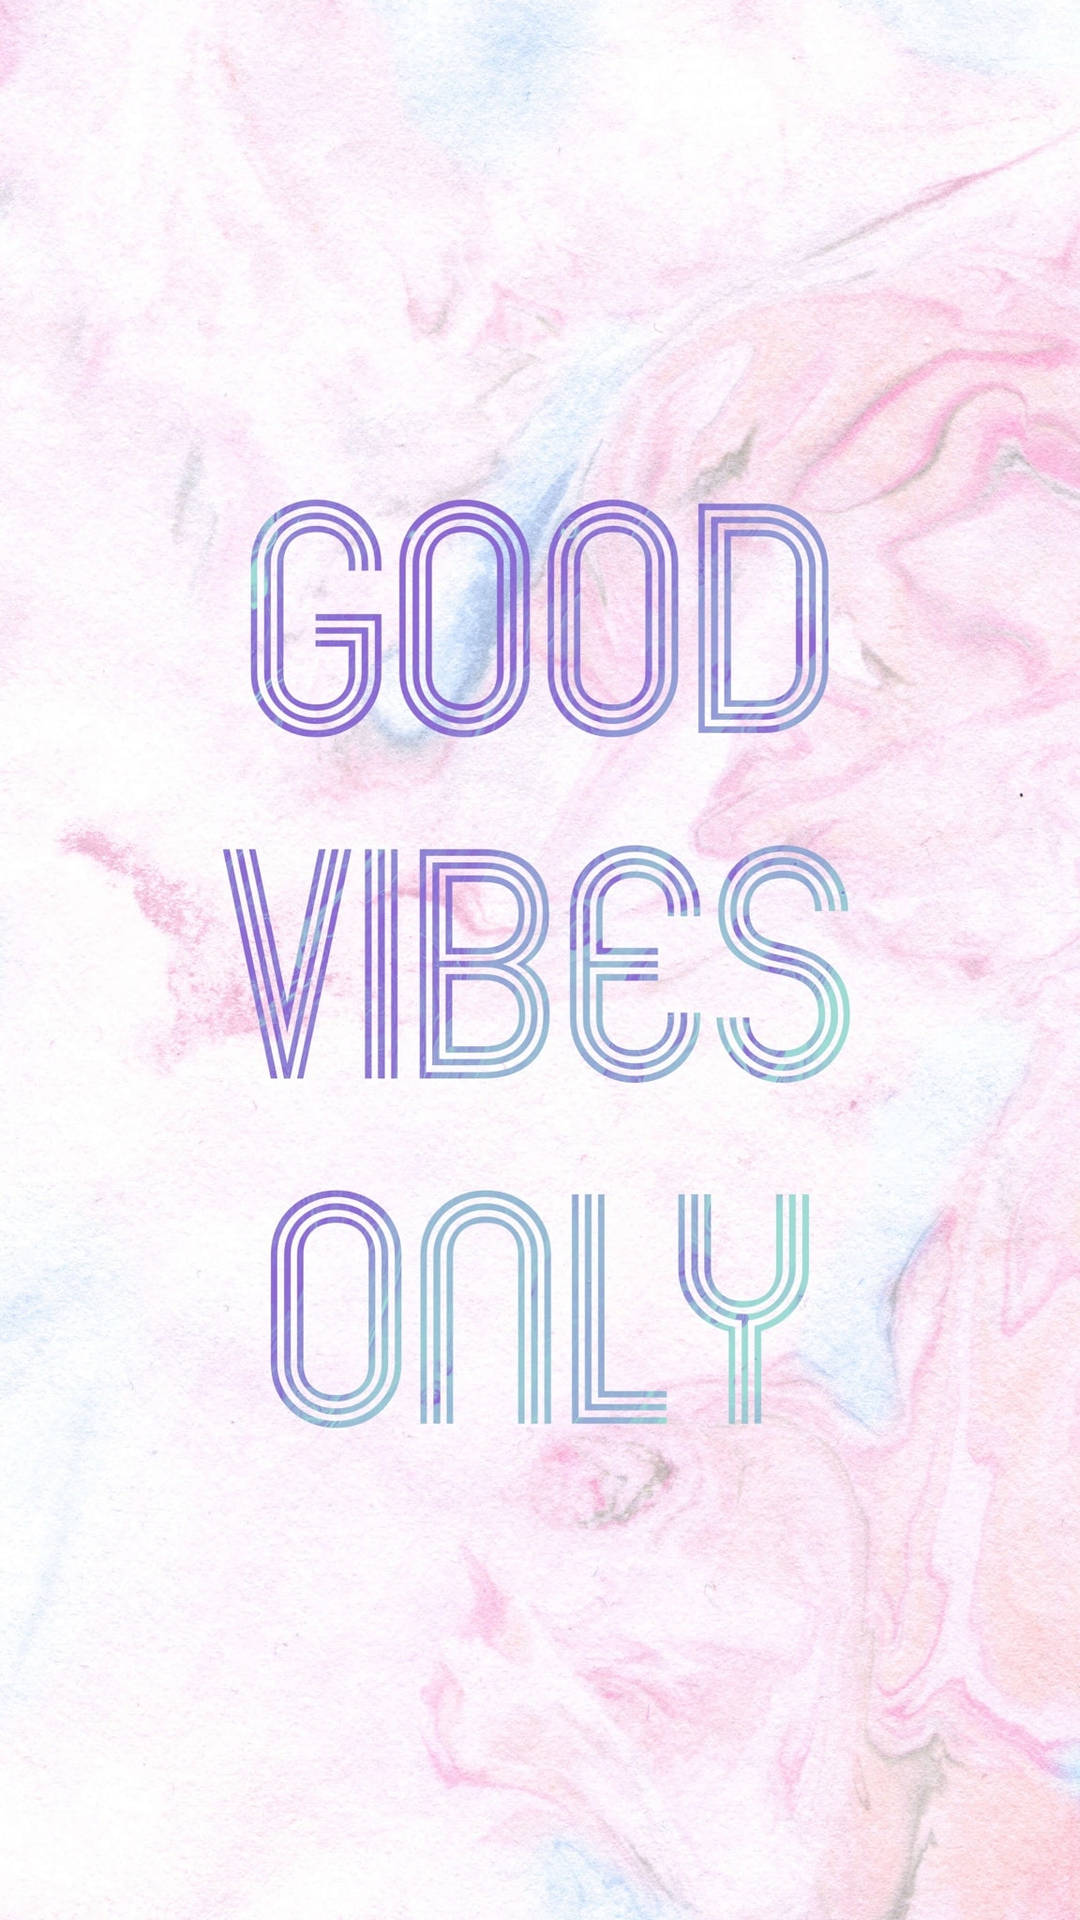 Free Vibes Wallpaper Downloads, [100+] Vibes Wallpapers for FREE ...